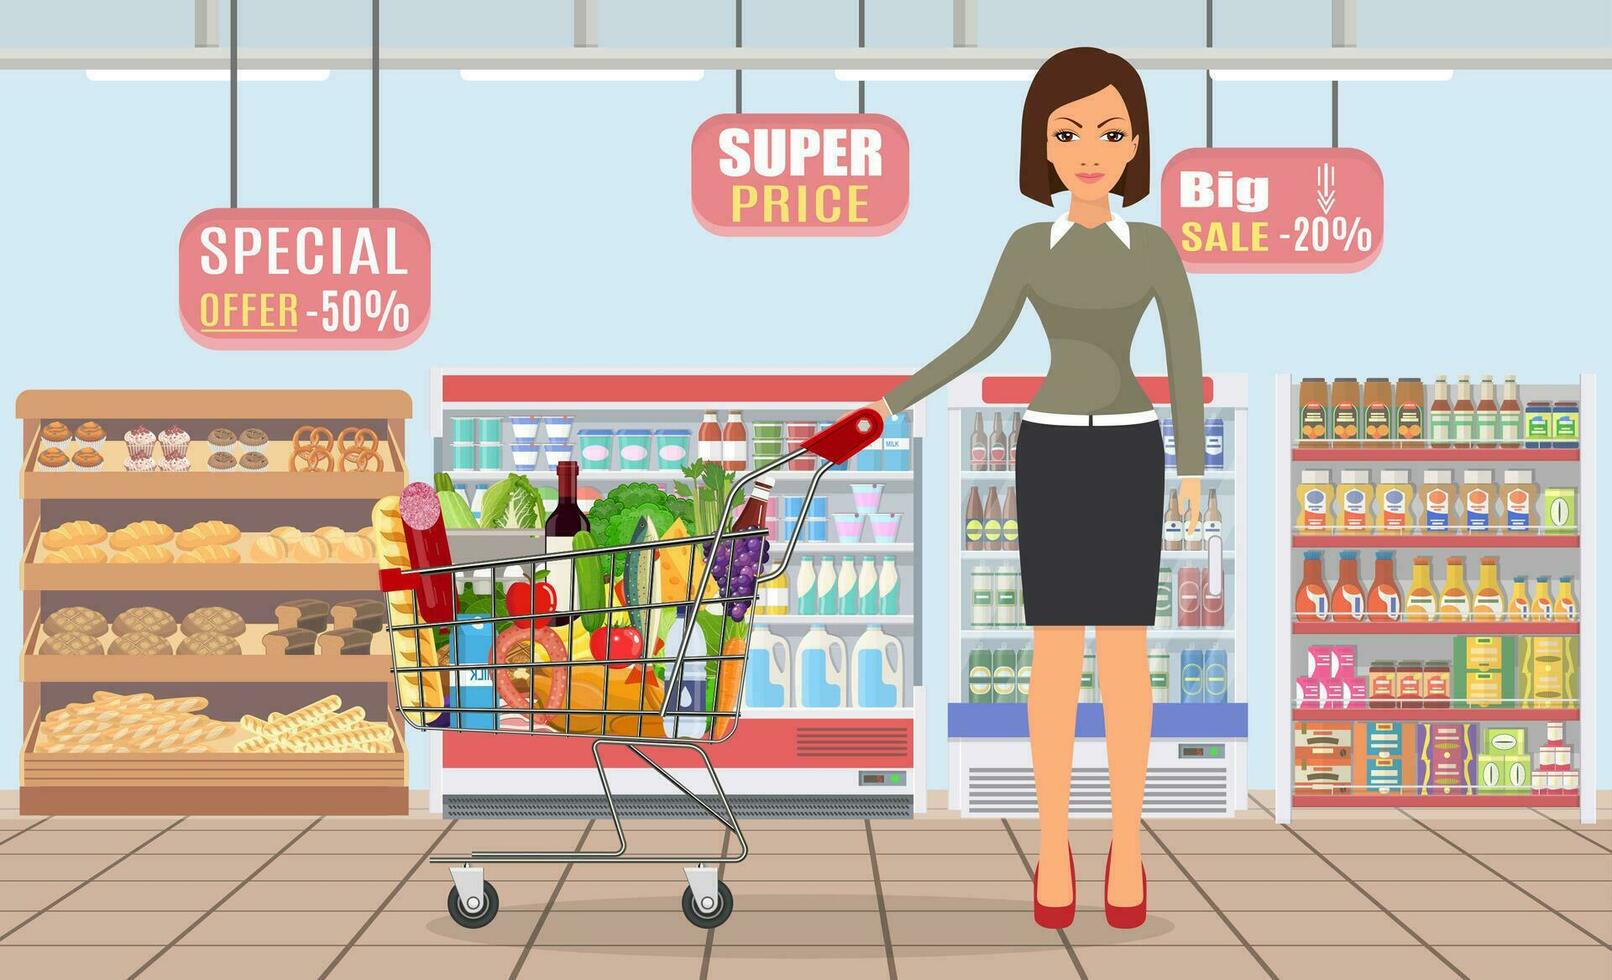 Young woman pushing supermarket shopping cart full of groceries. Vector illustration in flat style